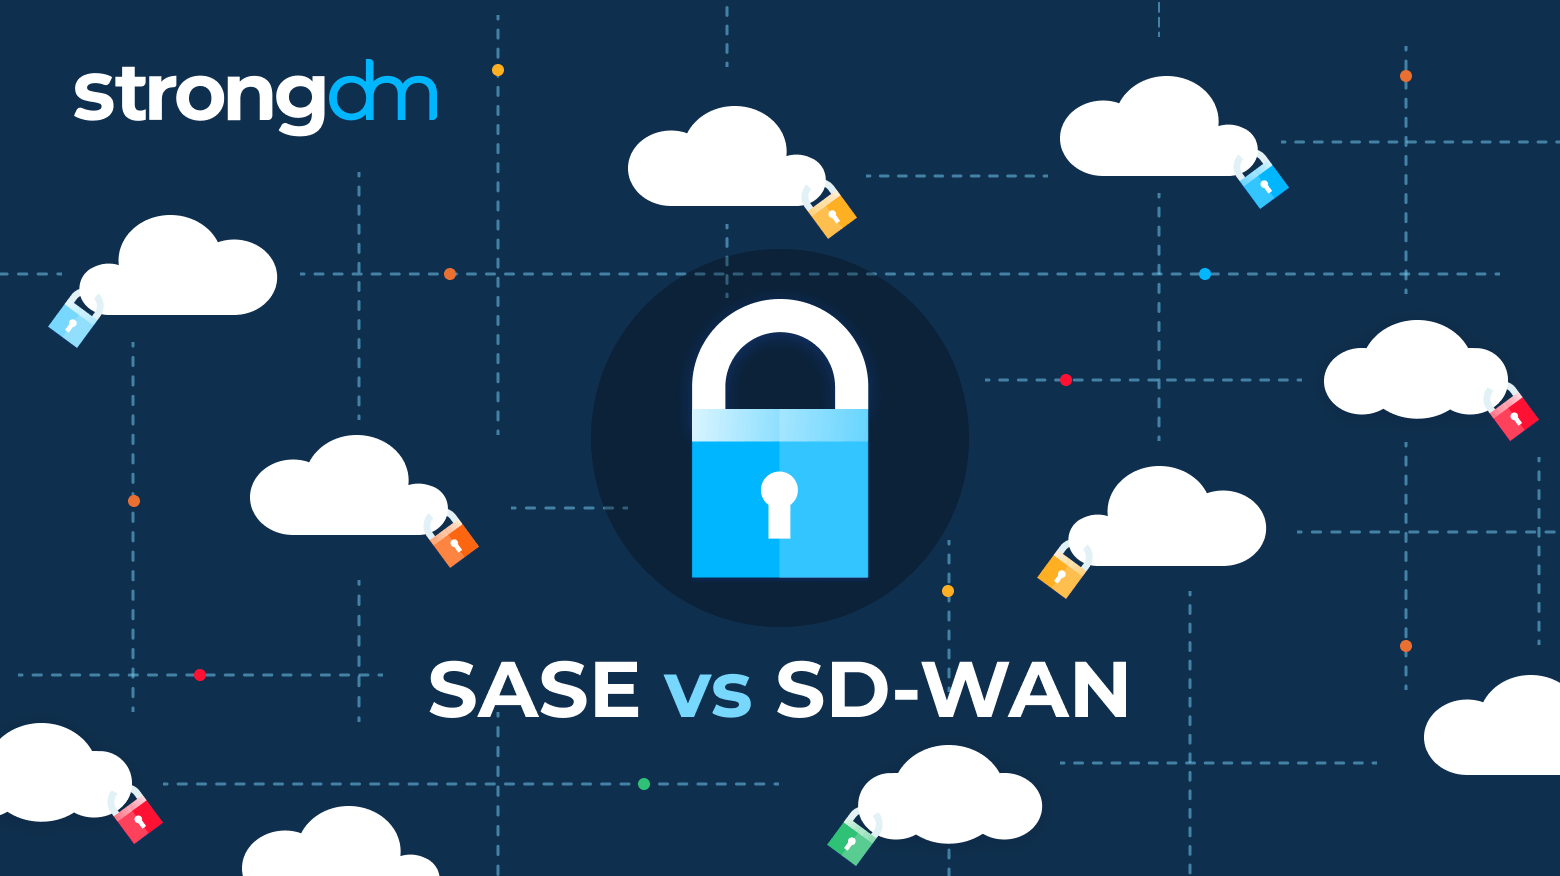 SASE vs. SD-WAN: All You Need to Know